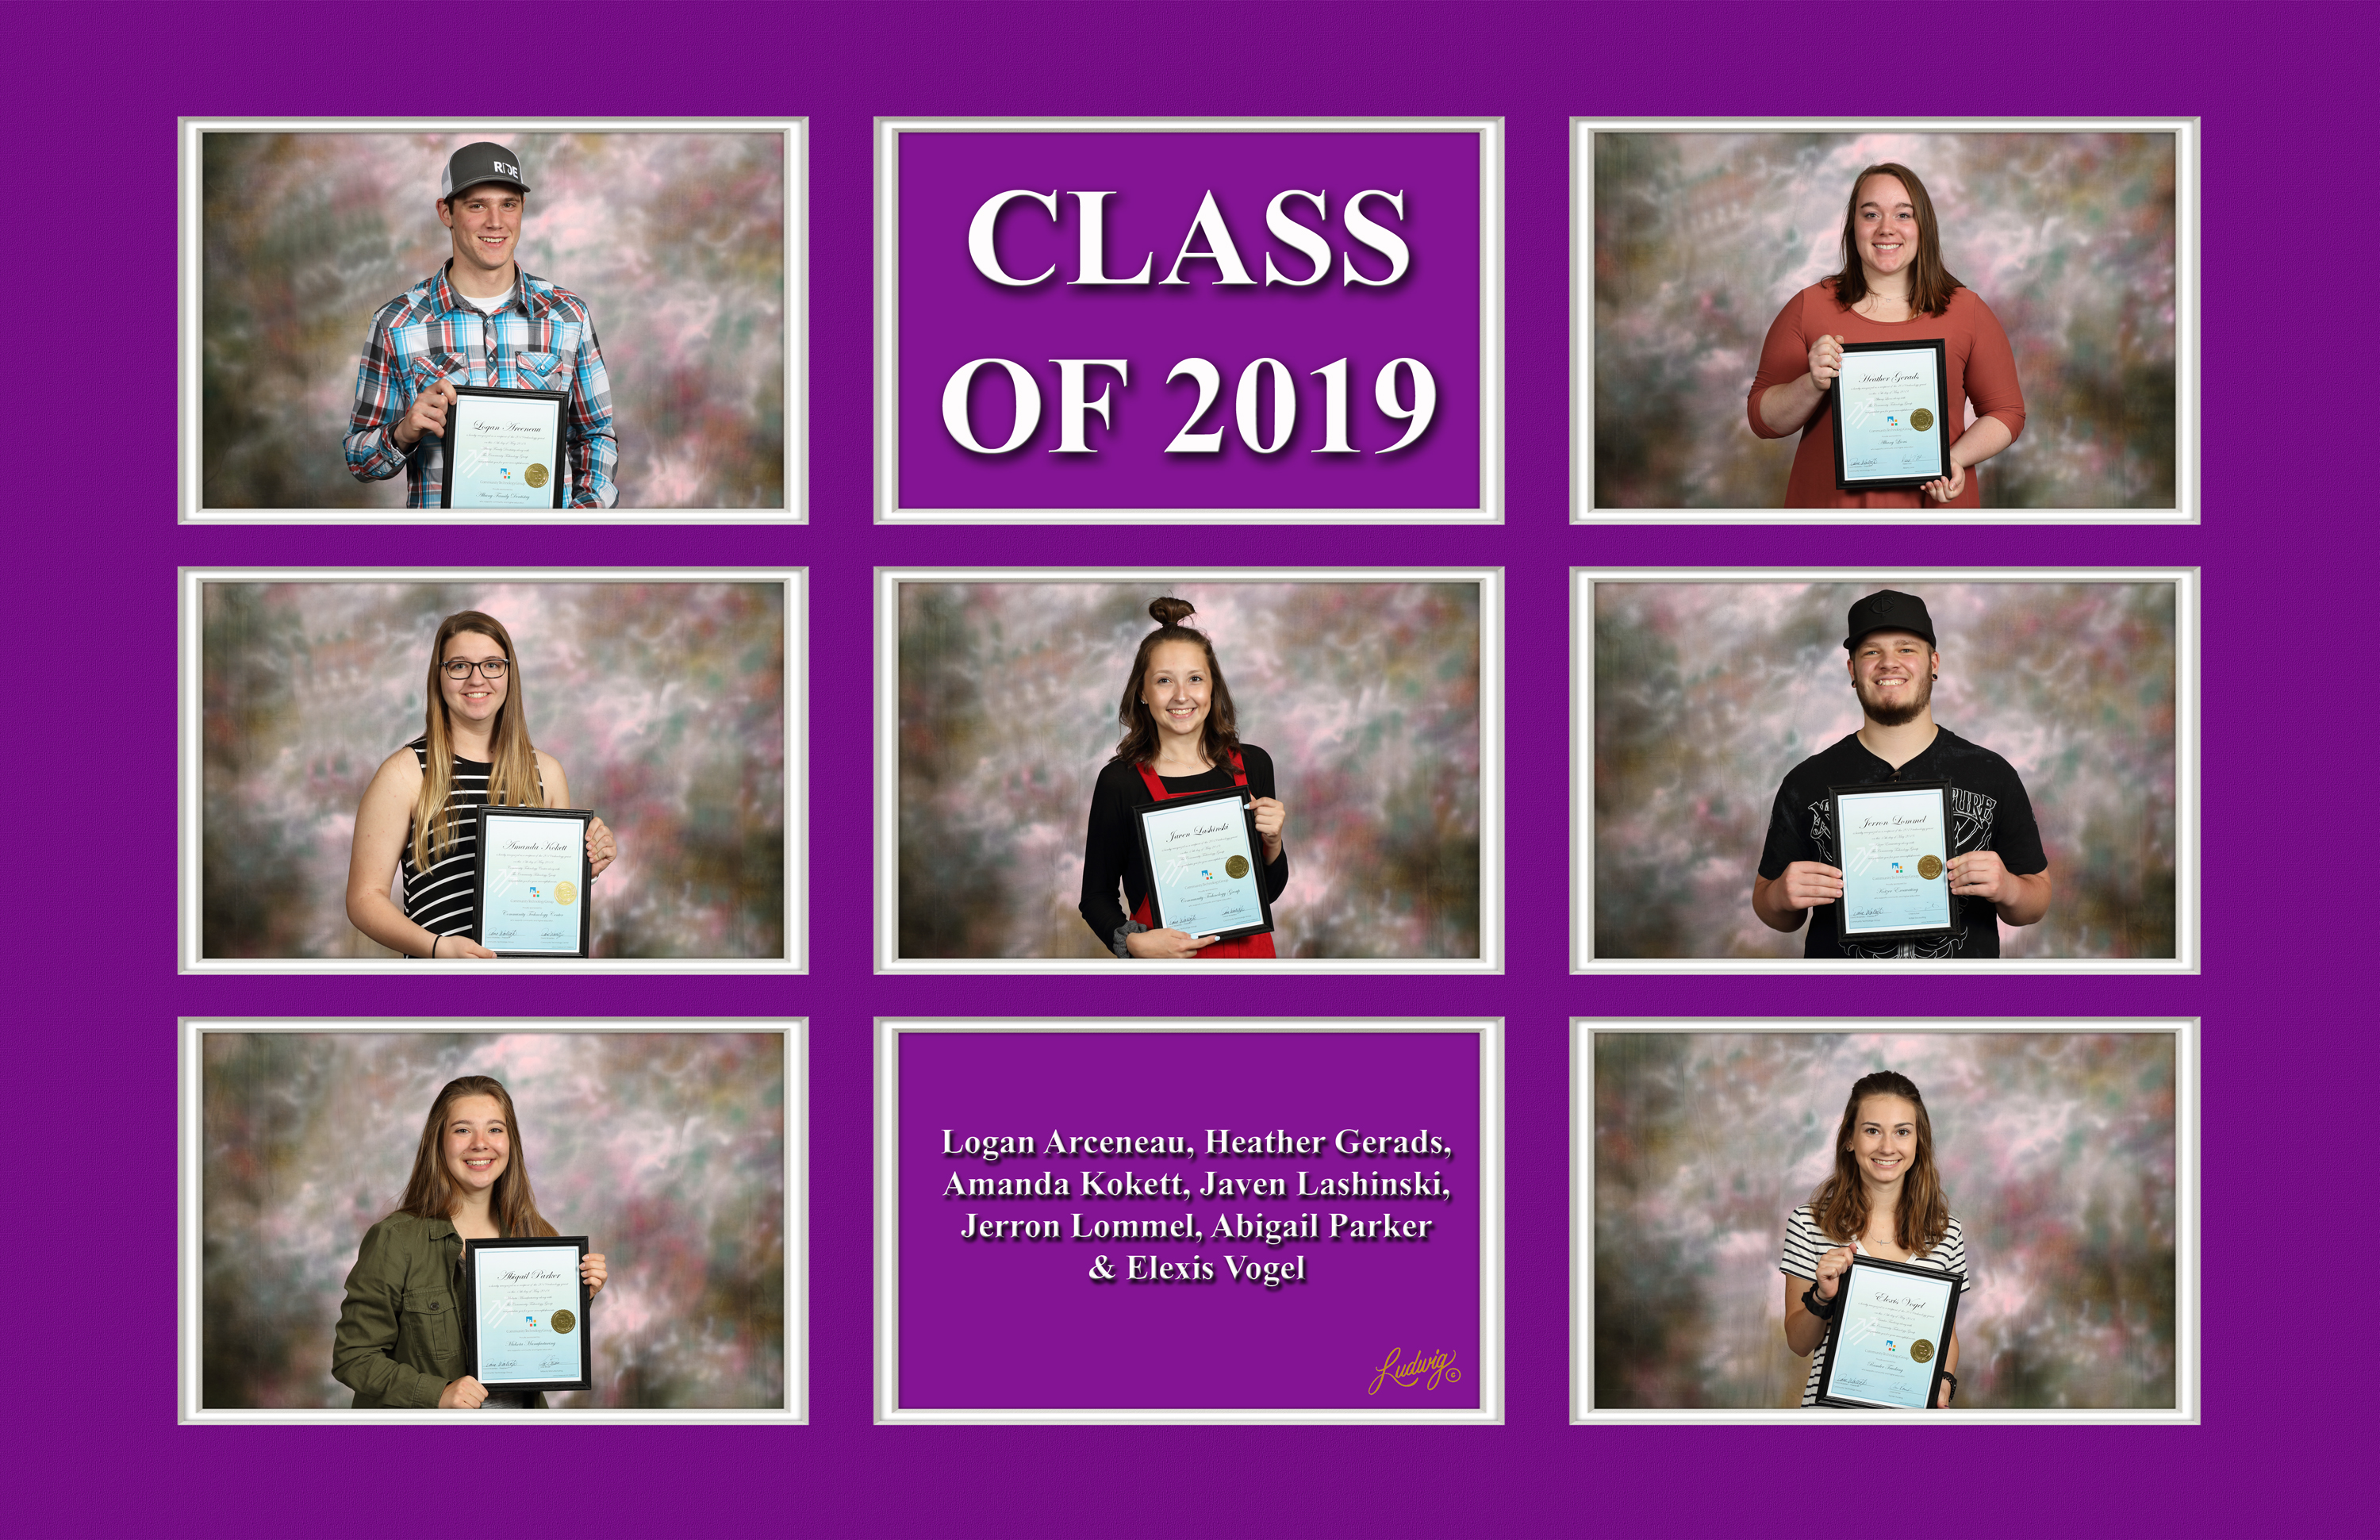 The students from the class of 2019